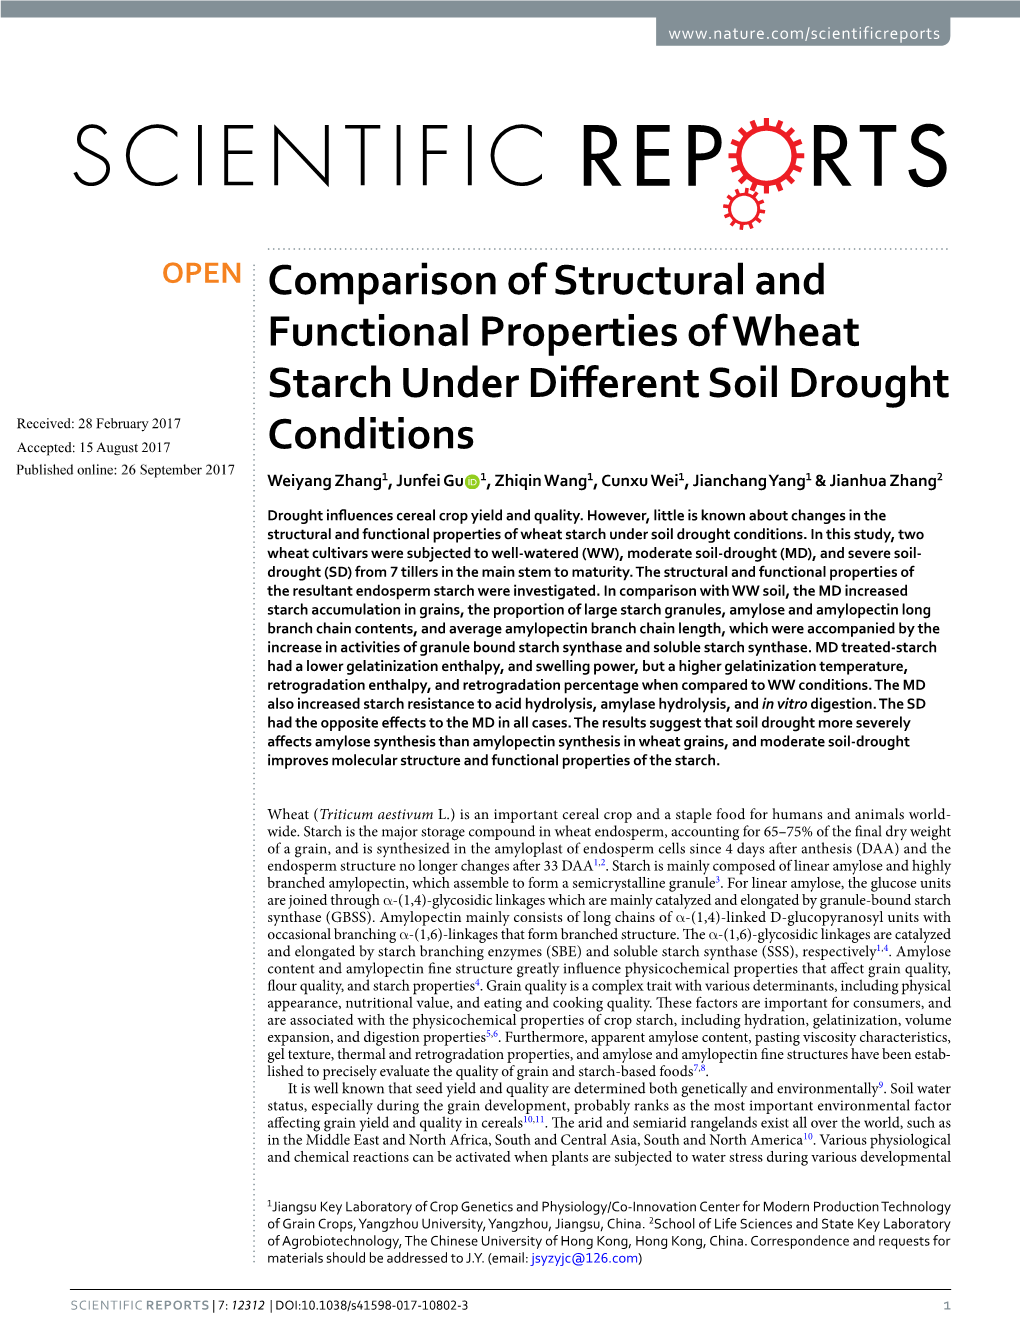 Comparison of Structural and Functional Properties of Wheat Starch Under Different Soil Drought Conditions